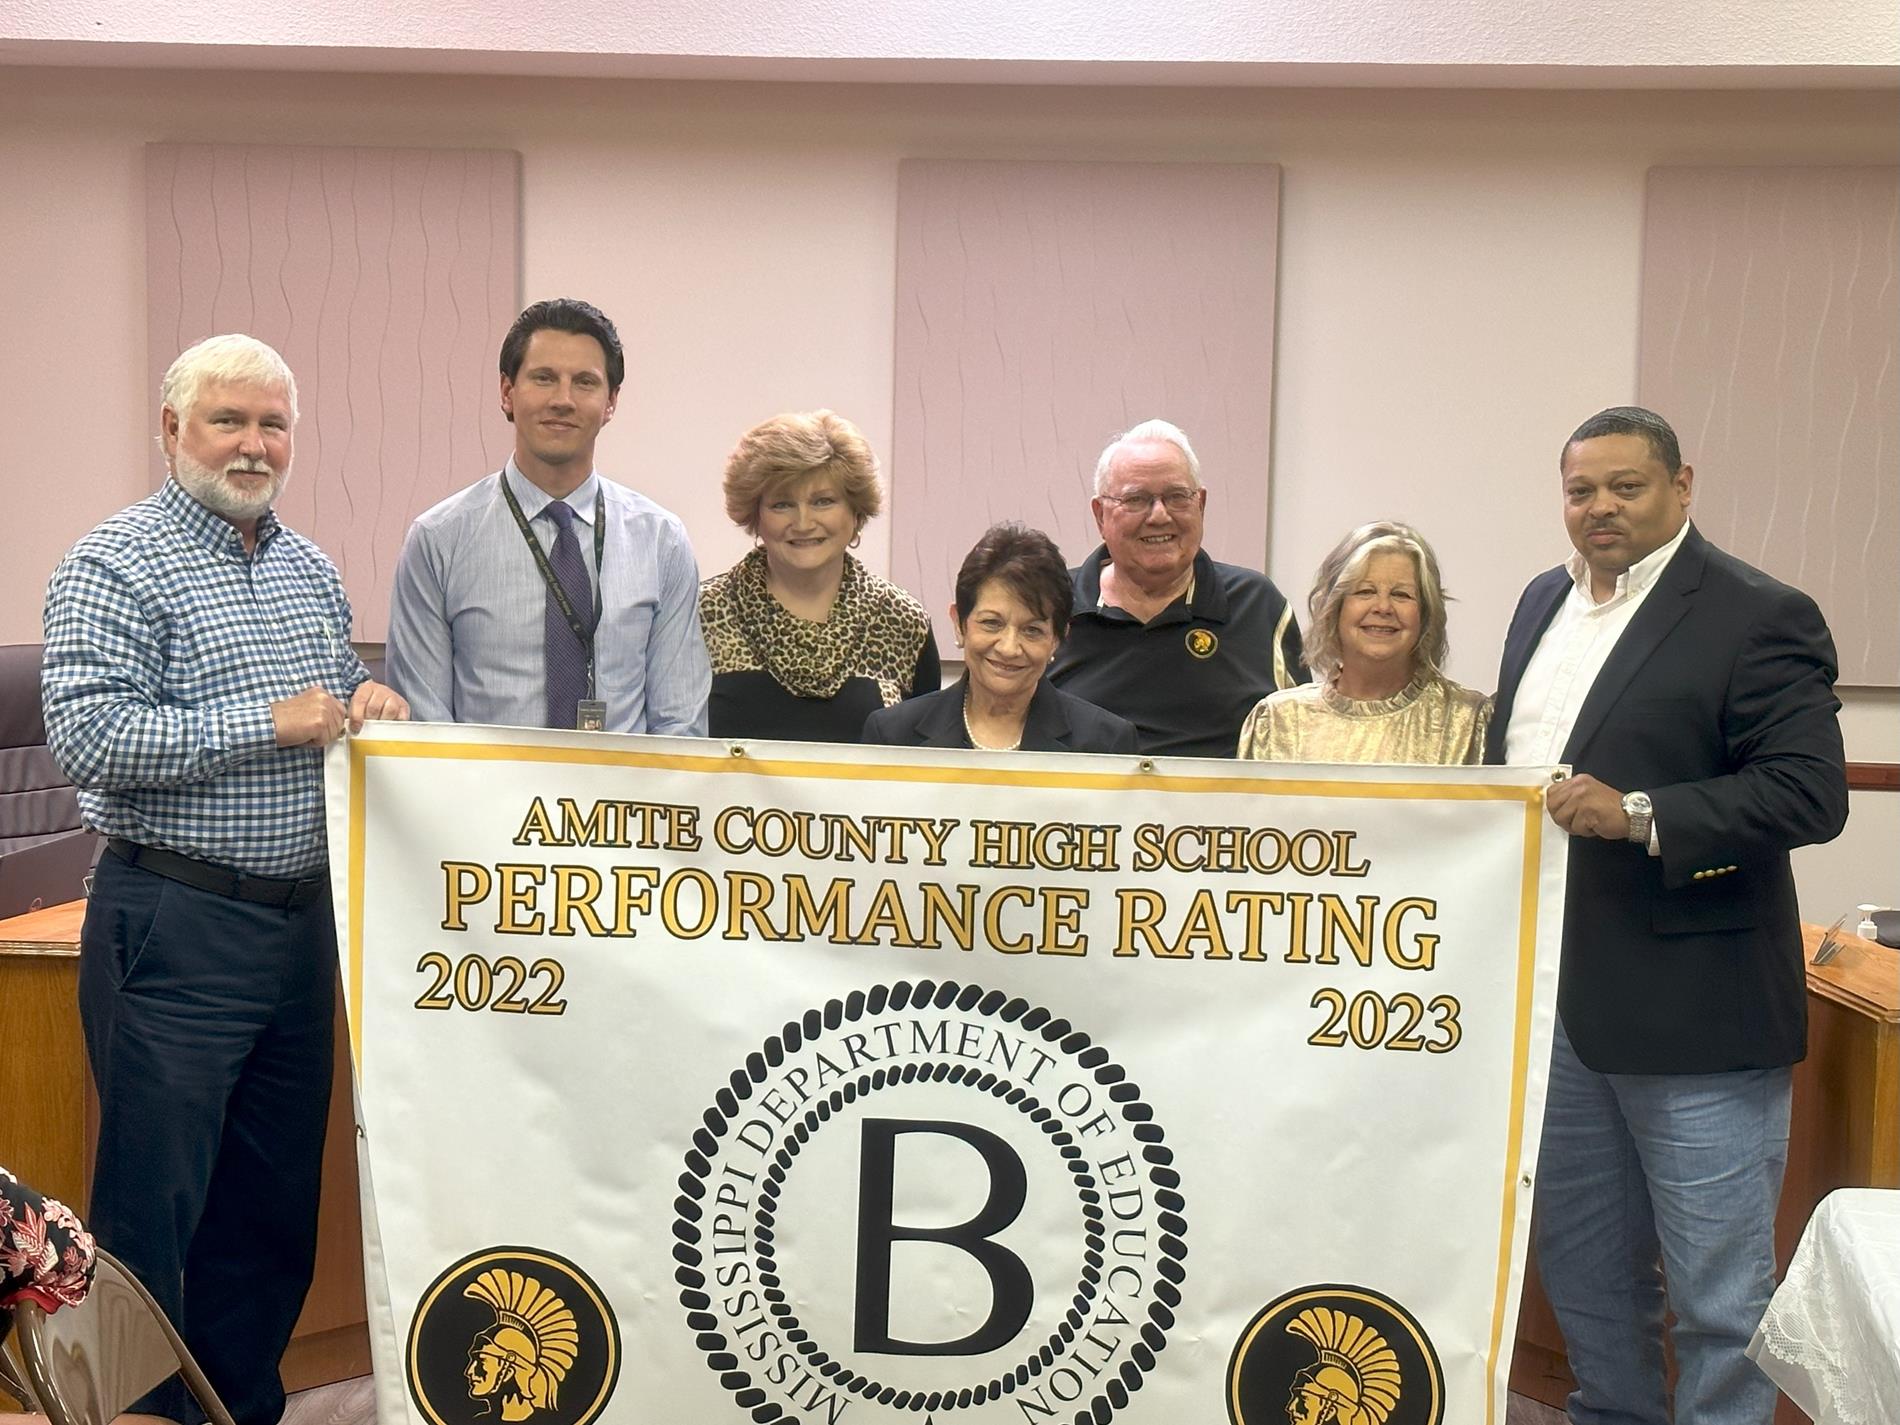 High School Recognition for B Rating